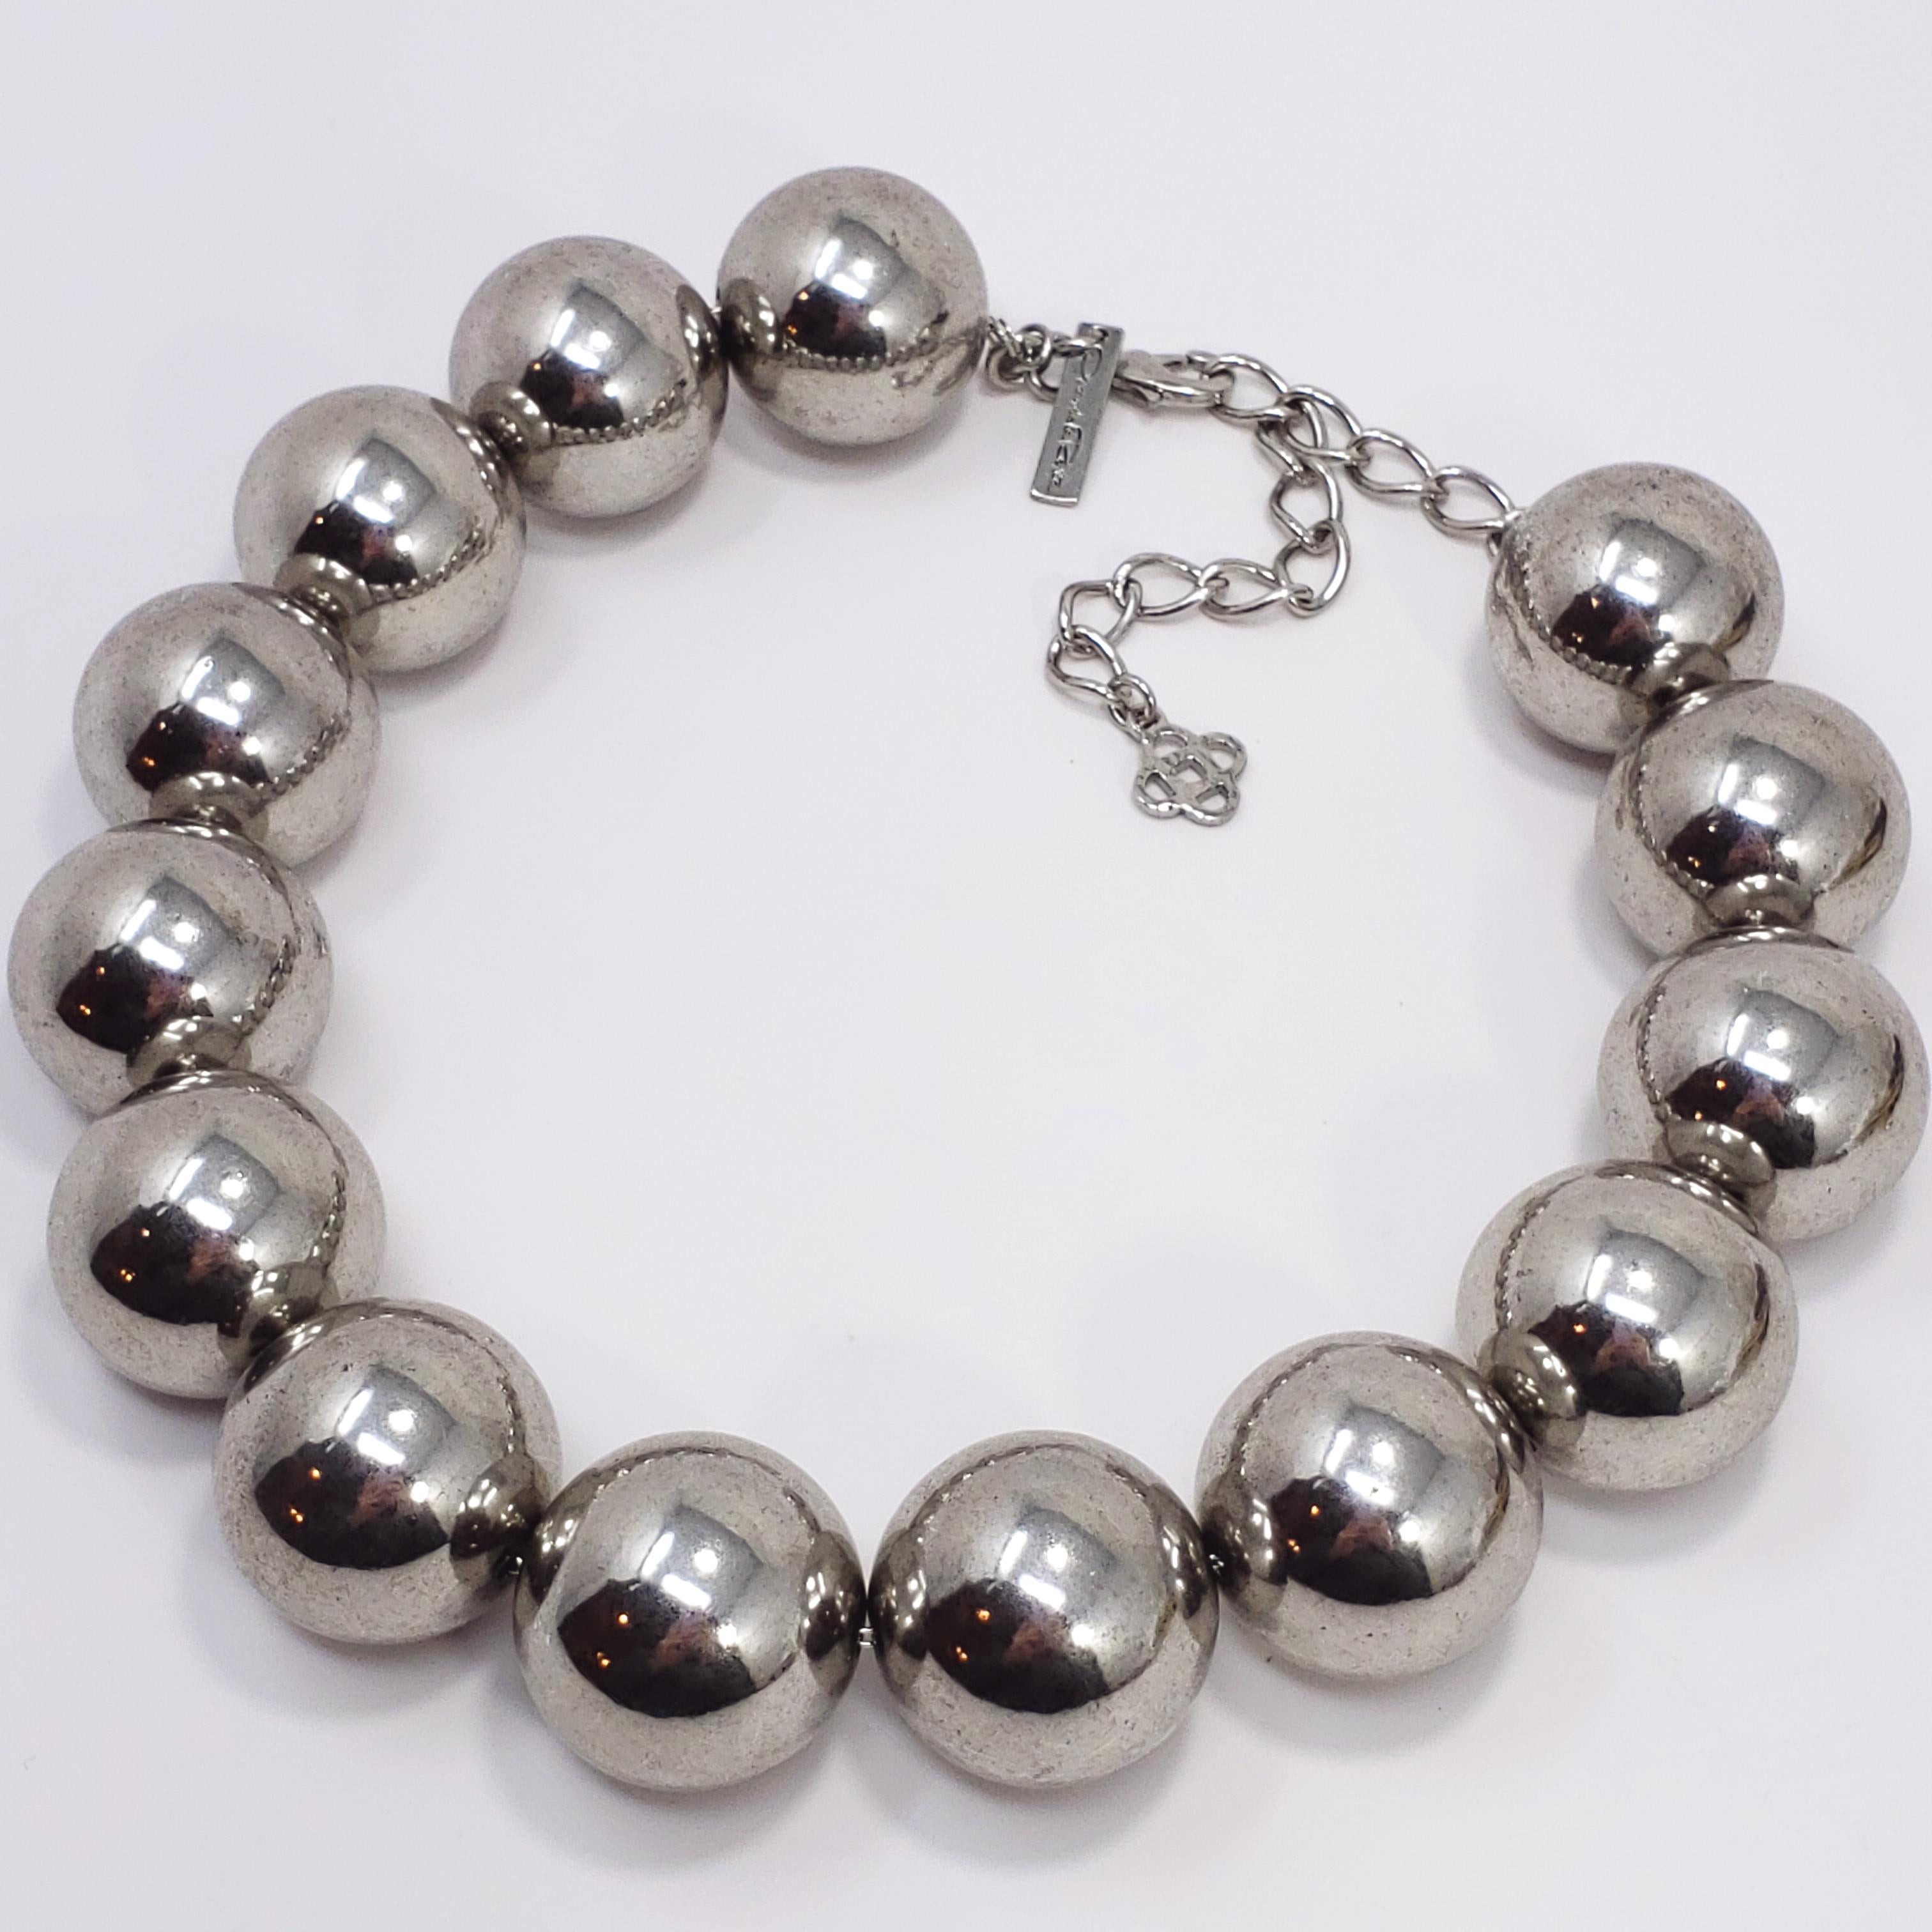 A bold oversized bead necklace by Oscar de la Renta. This necklace features large beads in a reflective, metallic, tarnished finish on a fine chain.  Large and loud, this necklace is sure to make a statement! Excellent unworn vintage